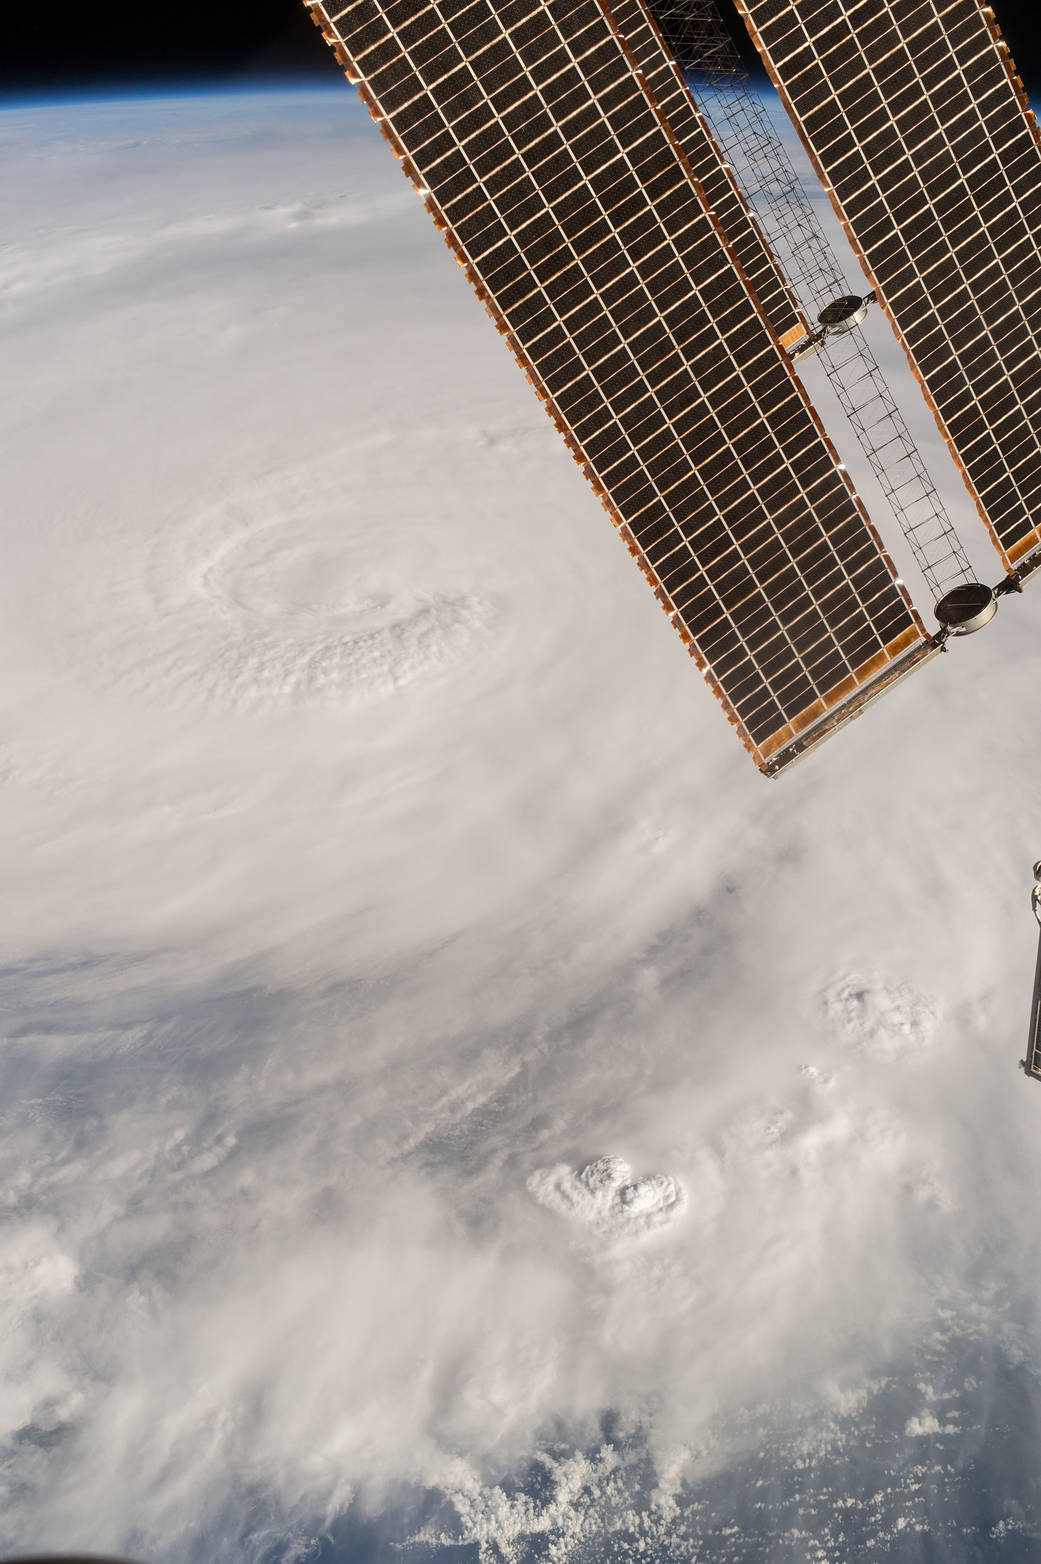 Hurricane Matthew photographed from space station window with solar arrays visible in the upper right corner